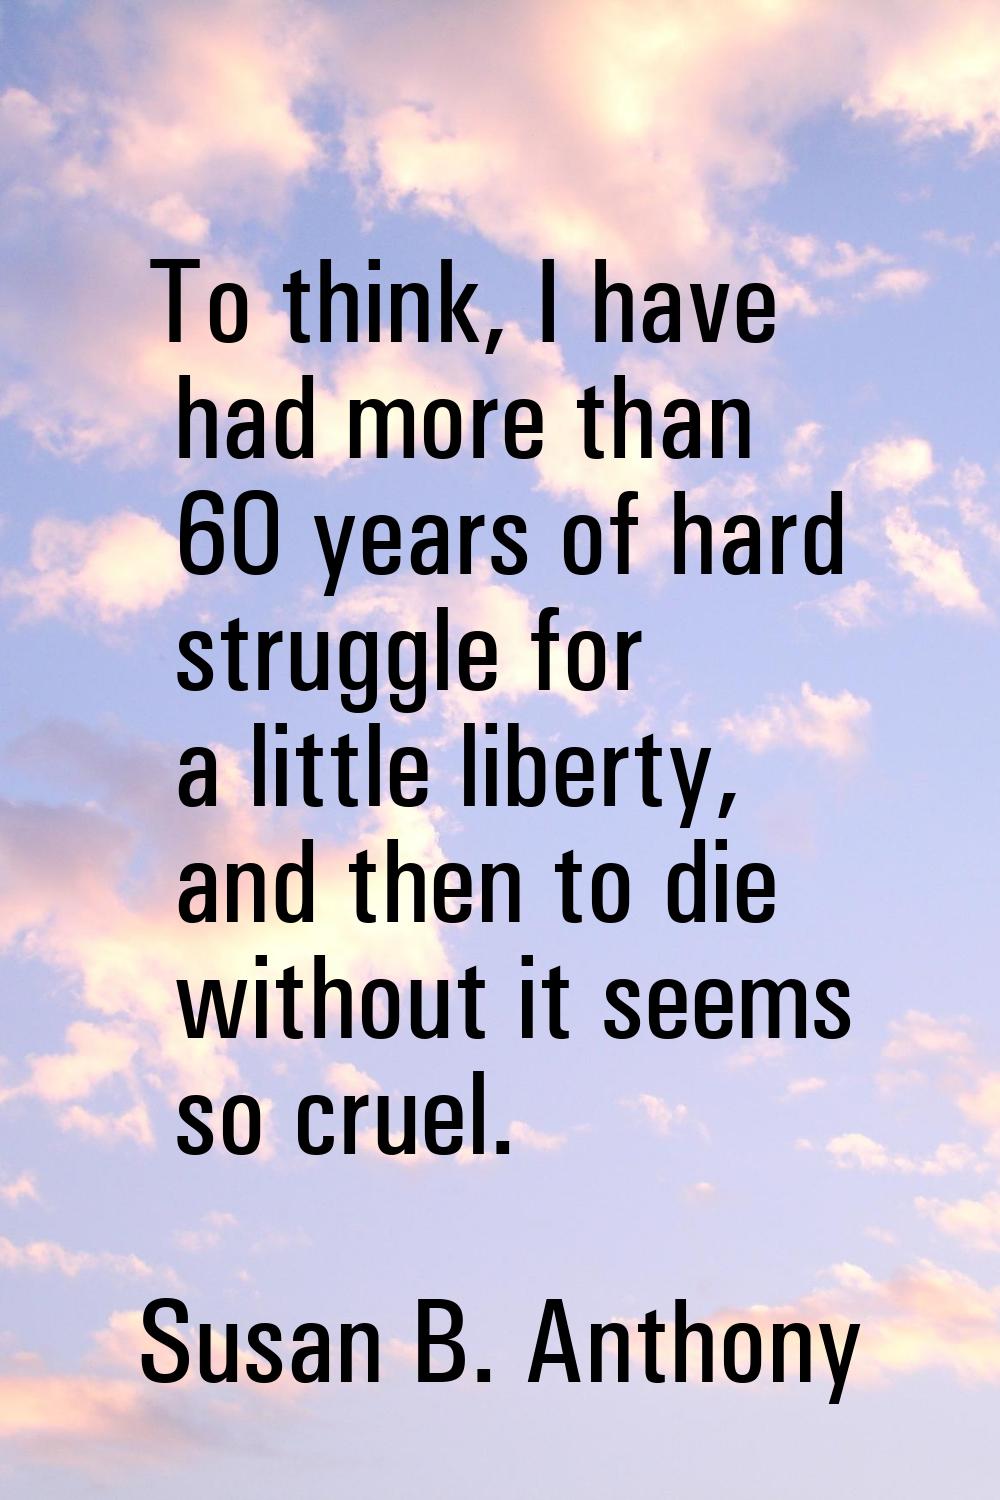 To think, I have had more than 60 years of hard struggle for a little liberty, and then to die with